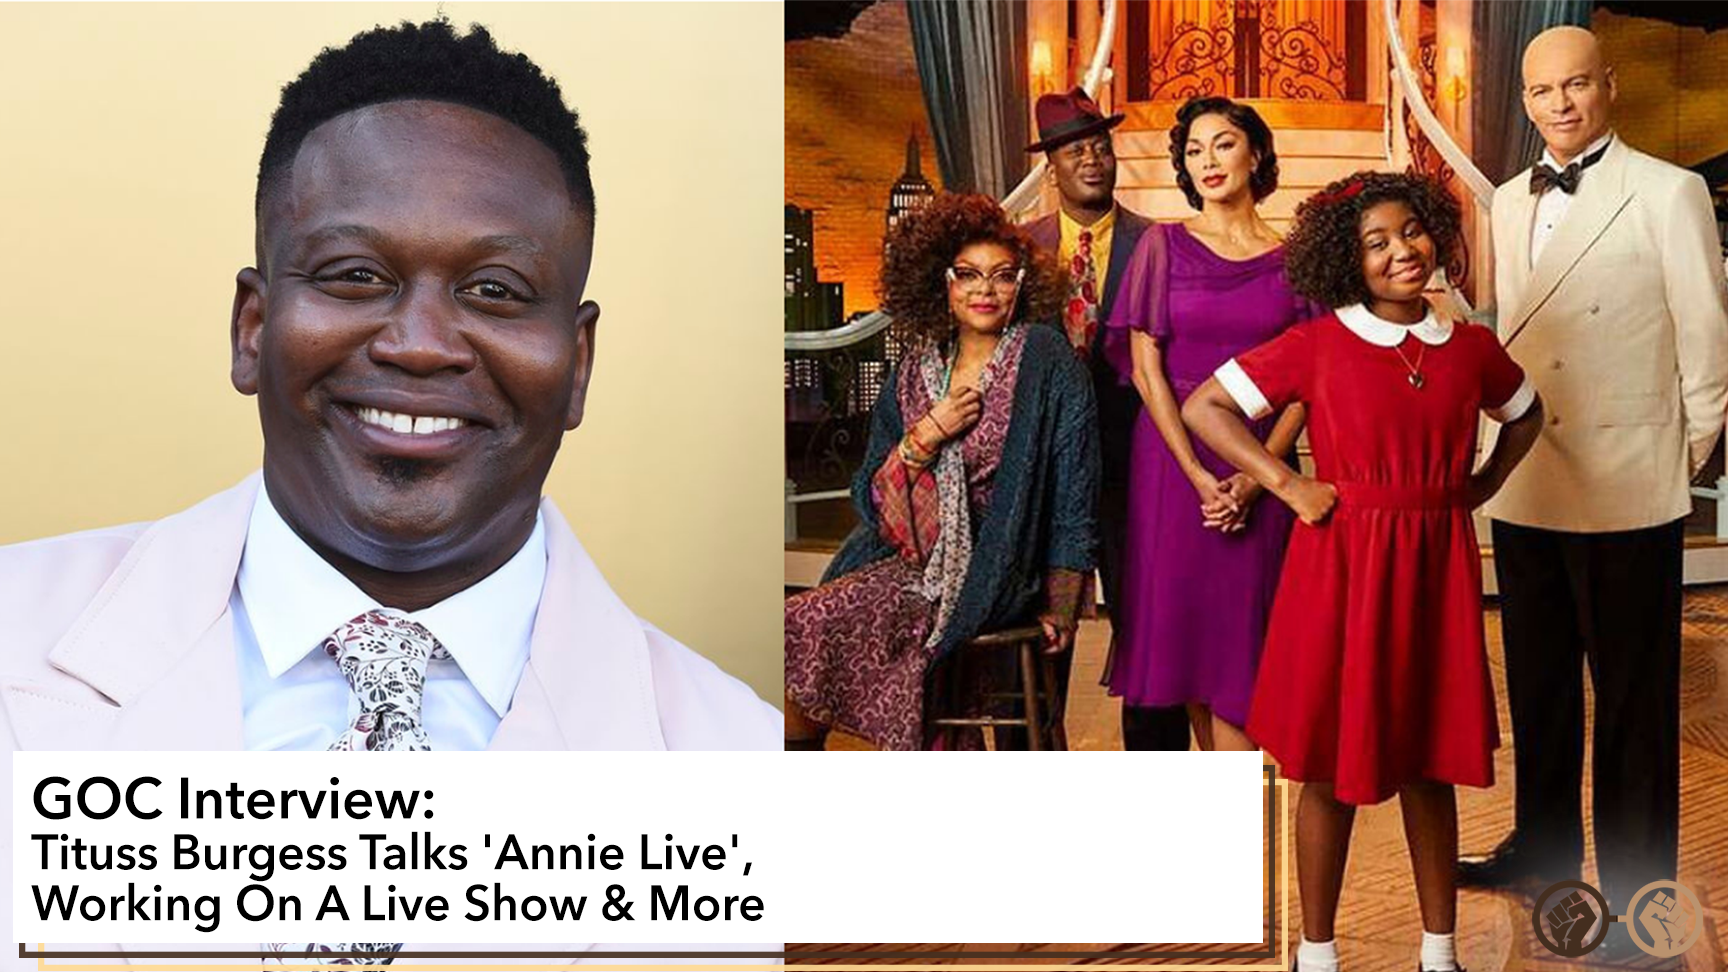 Interview: Tituss Burgess Talks ‘Annie Live!’, Working On A Live Show & More